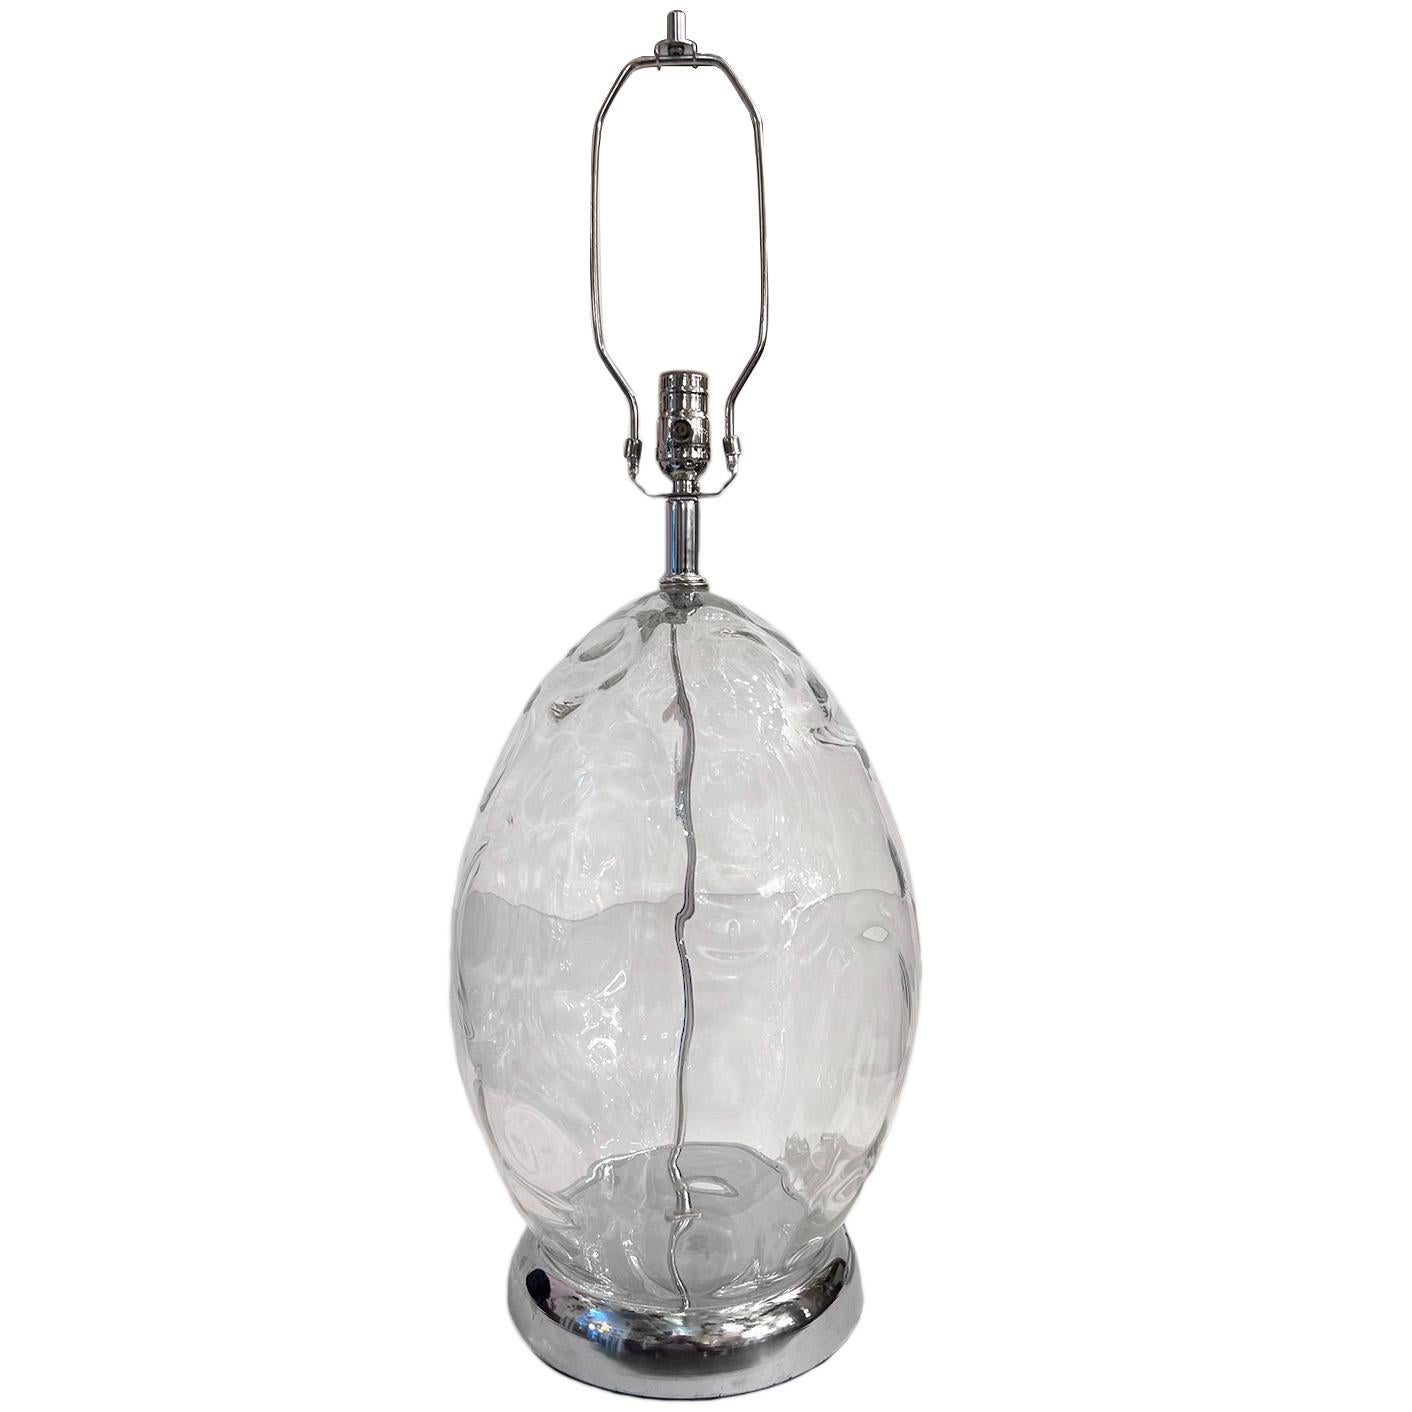 A circa 1960's Italian blown glass lamp with nickel plated base.

Measurements:
Height of body: 19